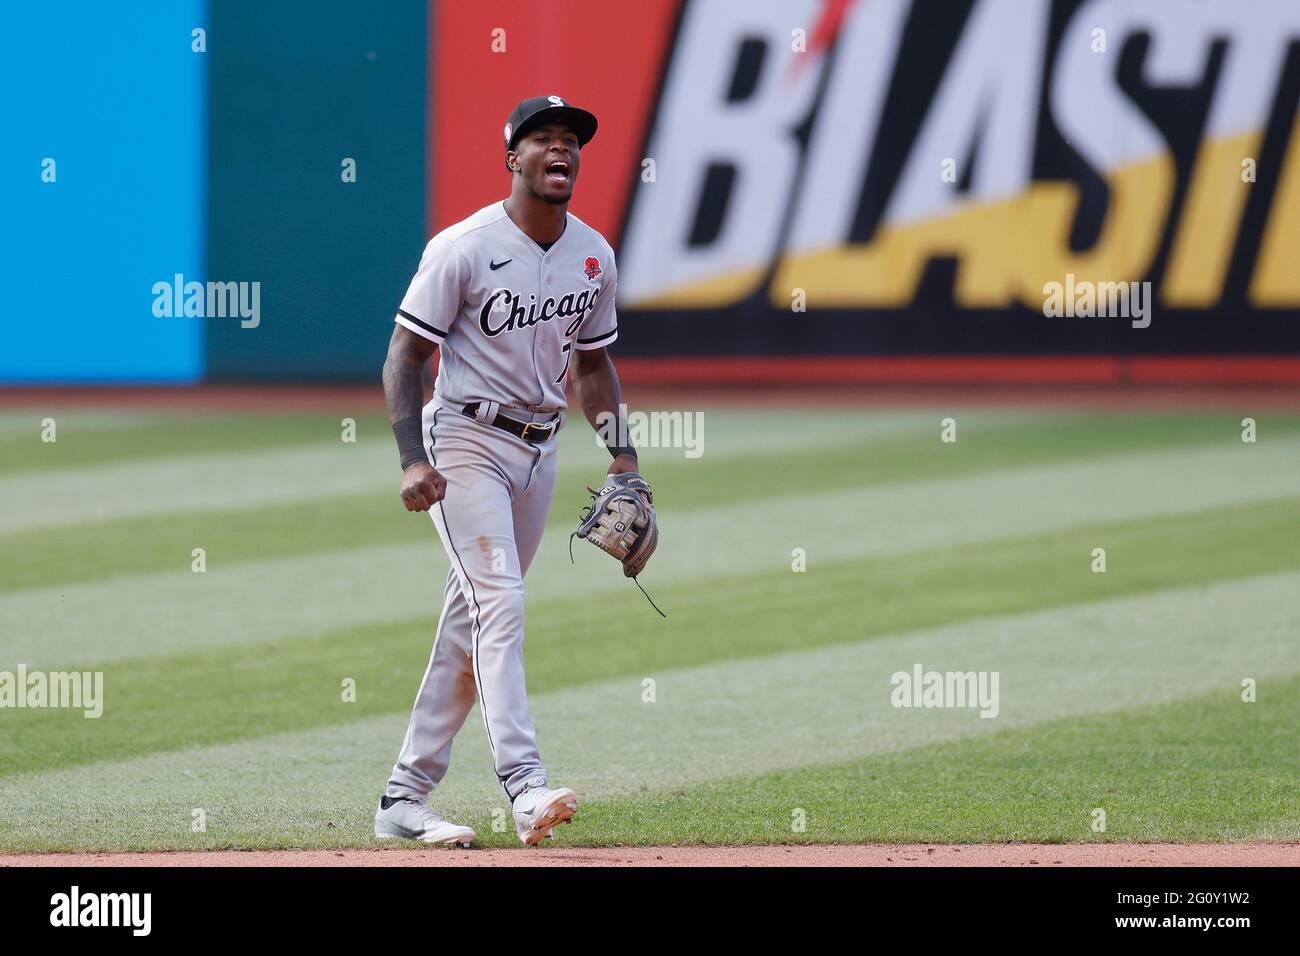 CLEVELAND, OH - MAY 31: Tim Anderson (7) of the Chicago White Sox reacts after the final out of a game against the Cleveland Indians at Progressive Fi Stock Photo